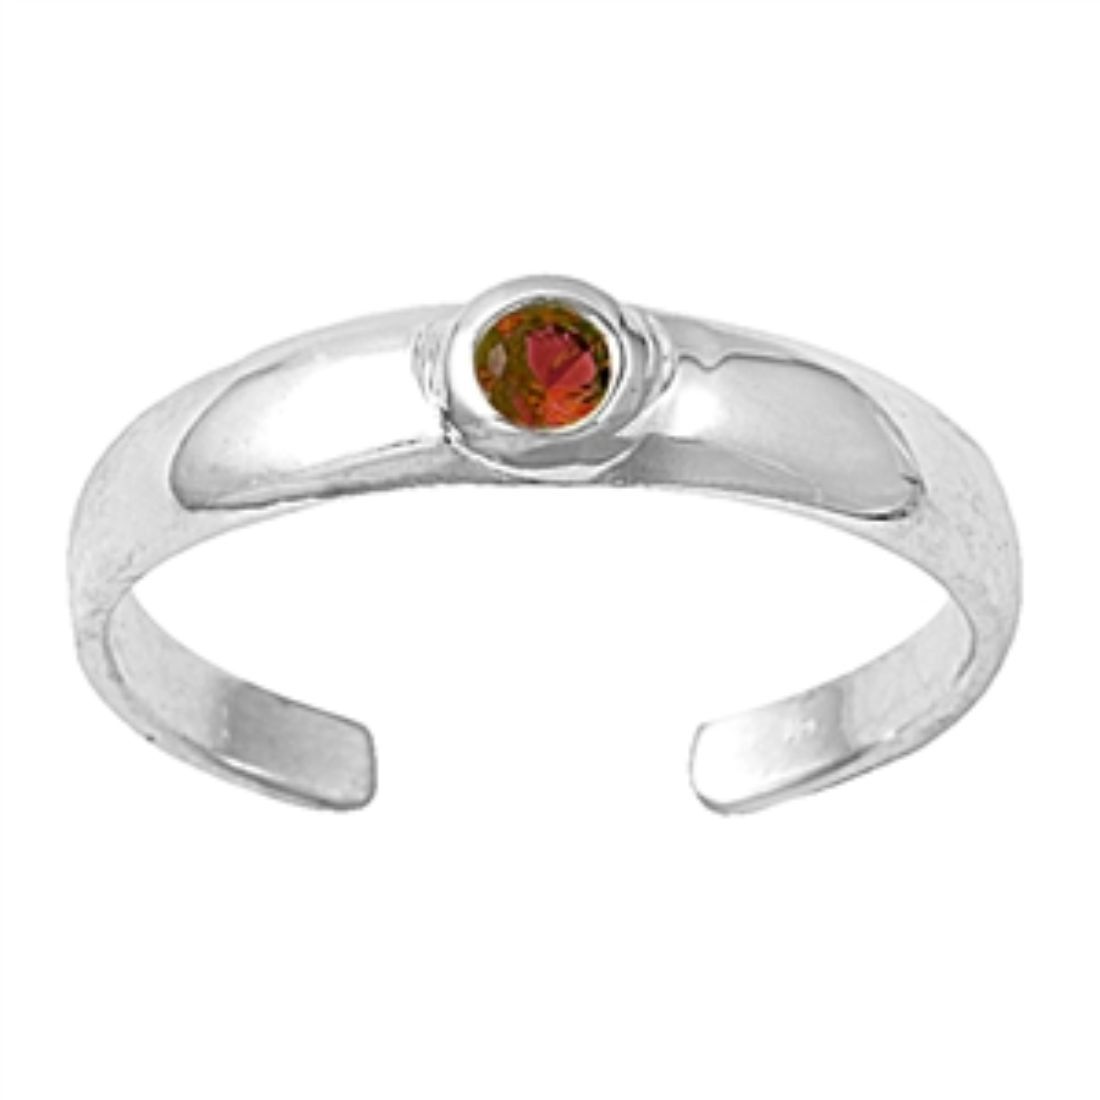 Silver Toe Ring Adjustable Band Simulated Garnet CZ 925 Sterling Silver (4mm)